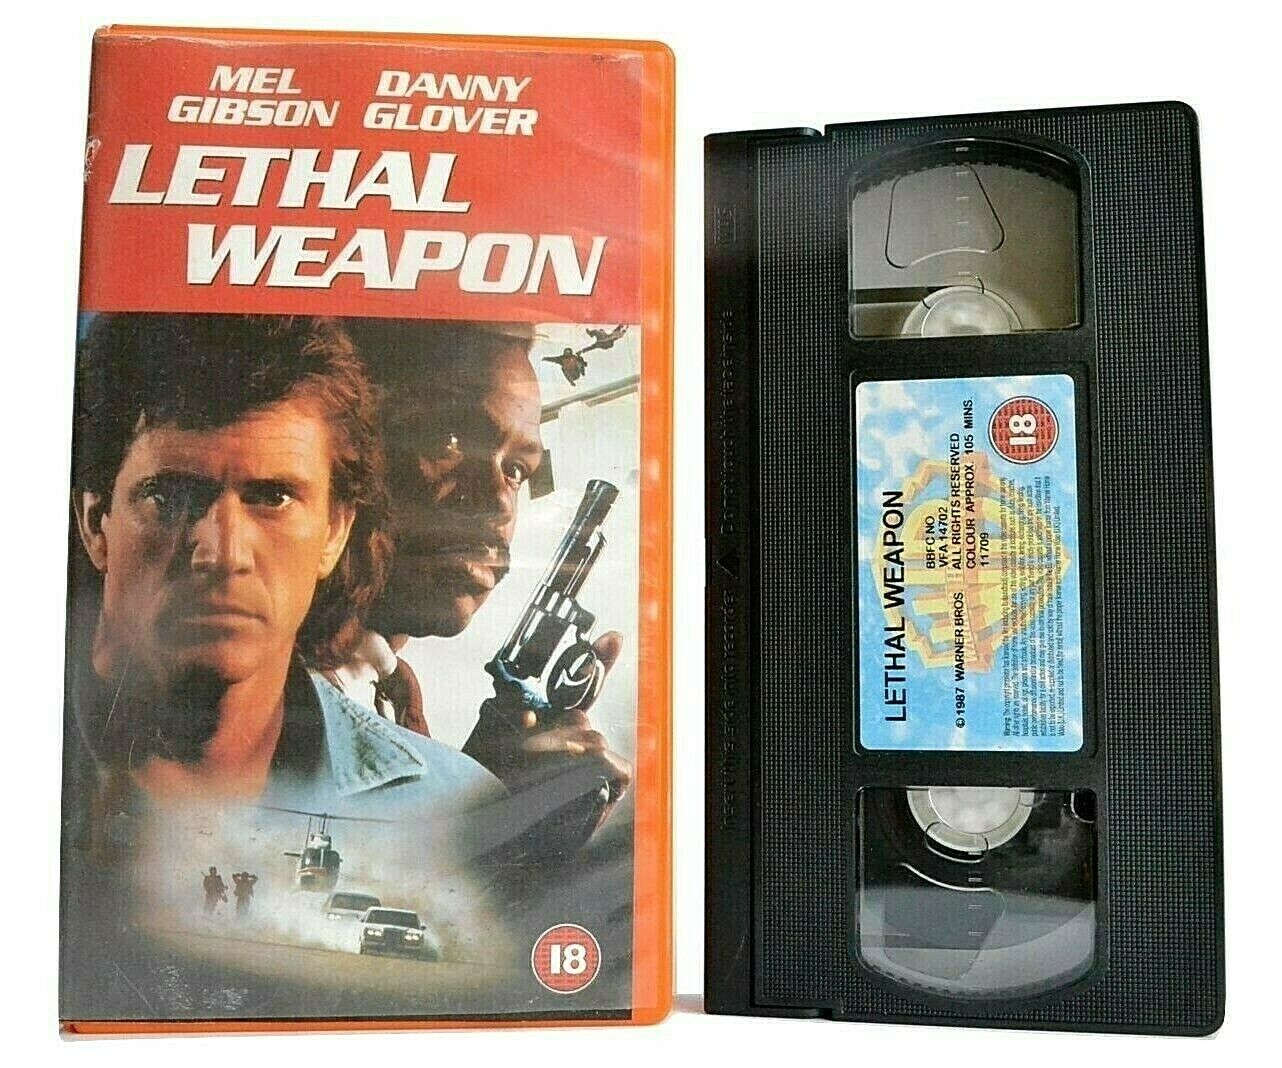 Lethal Weapon (1987): Explosive Buddy Cop Action - Mel Gibson/Danny Glover - VHS - Golden Class Movies LTD